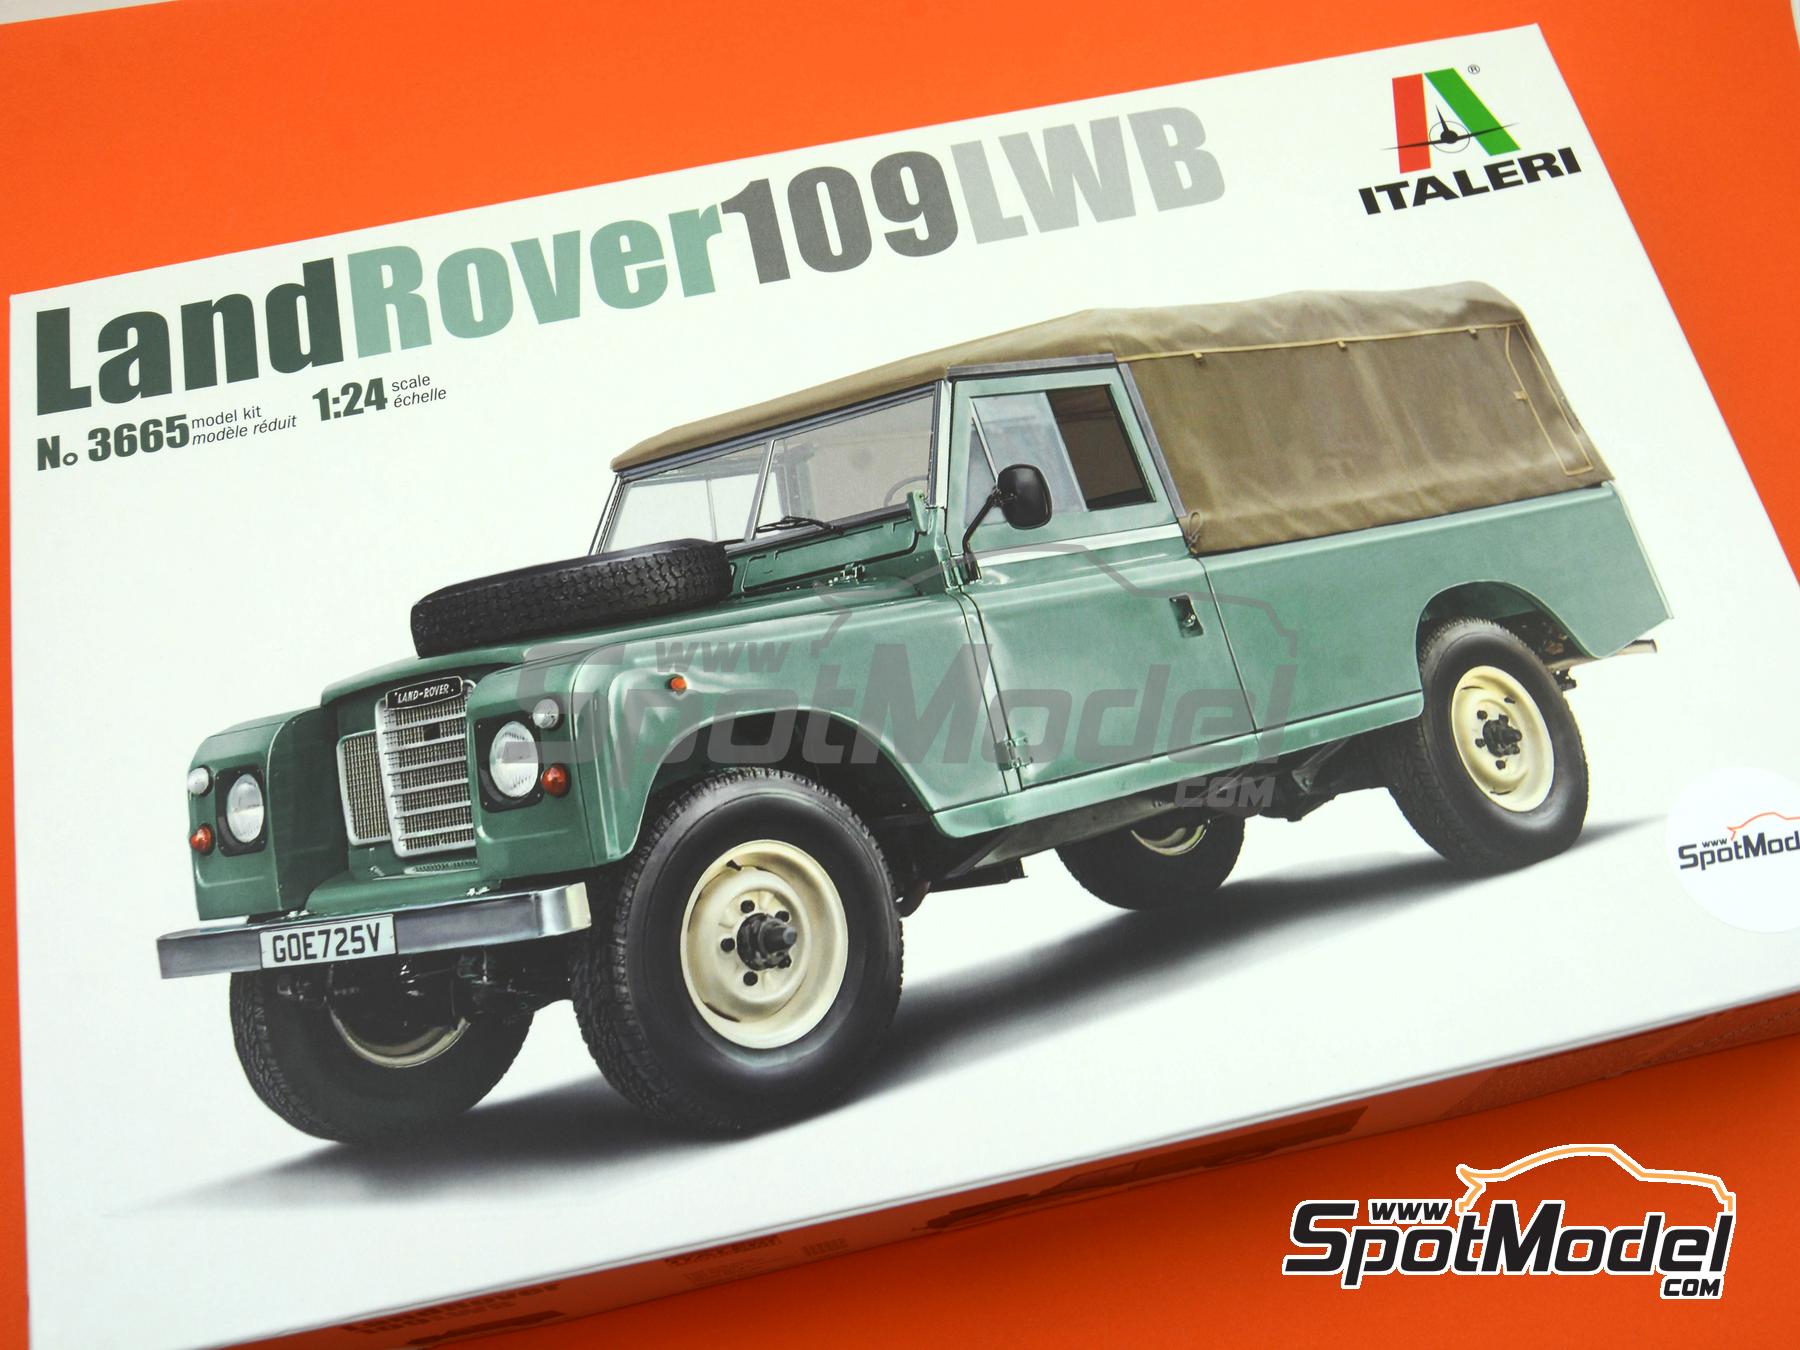  Italeri 3665 1:24 Land Rover 109 LWB - Construction Kit,  Standing Model Building, Crafts, Hobby, Gluing, Plastic Kit, Detailed  IT3665 : Arts, Crafts & Sewing